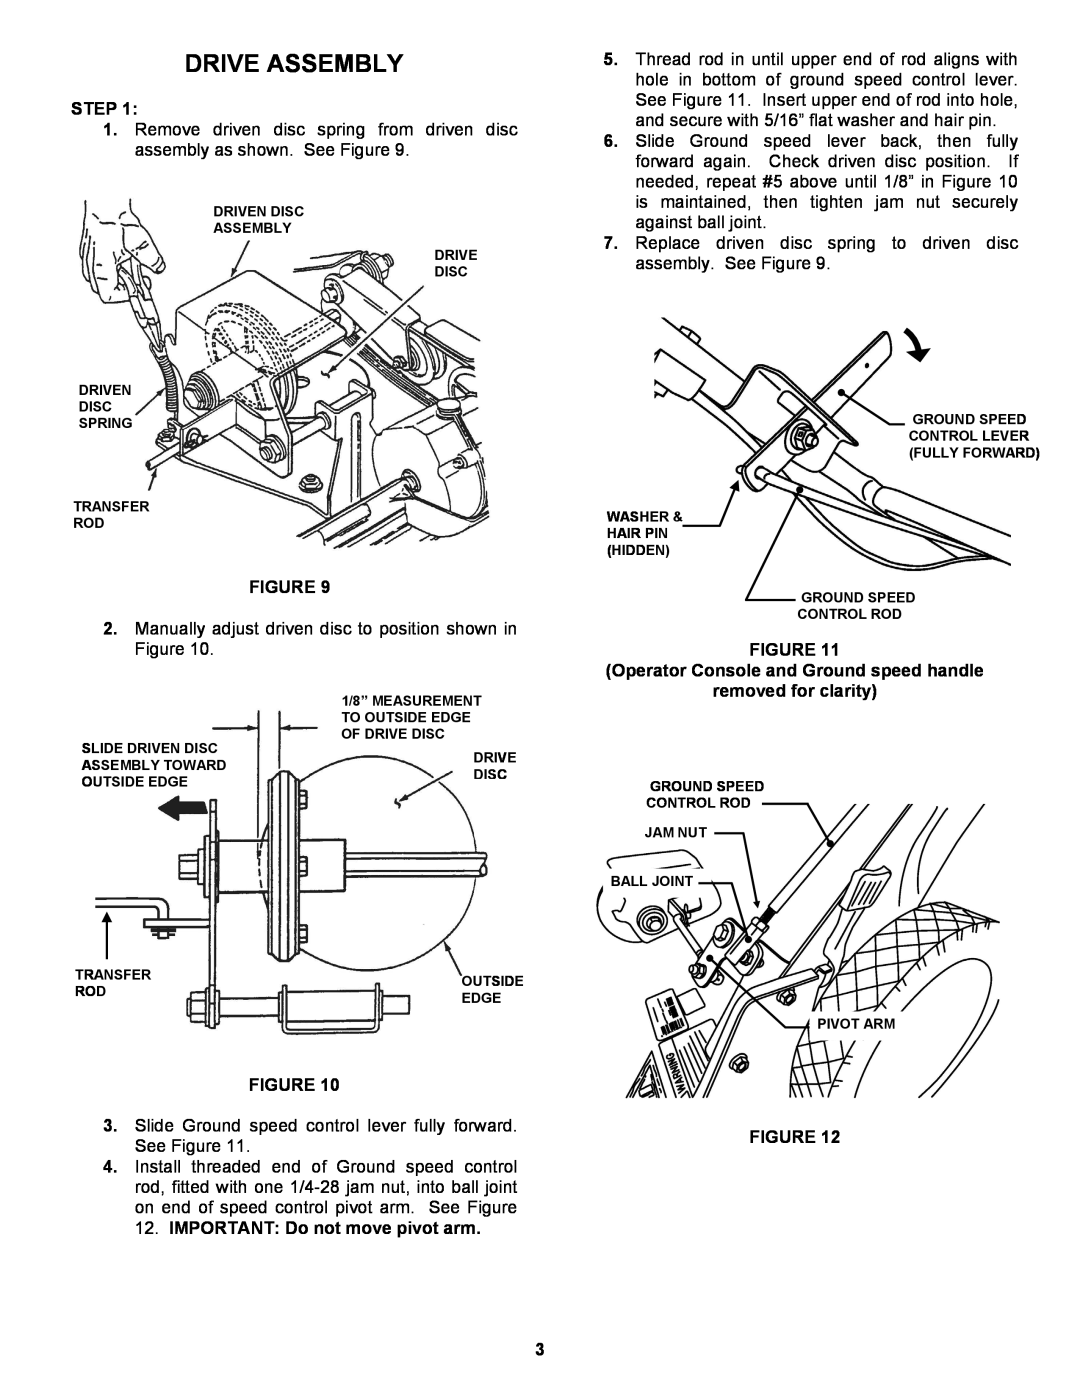 Snapper Lawn Mower manual Drive Assembly, Step, FIGURE Operator Console and Ground speed handle, removed for clarity 